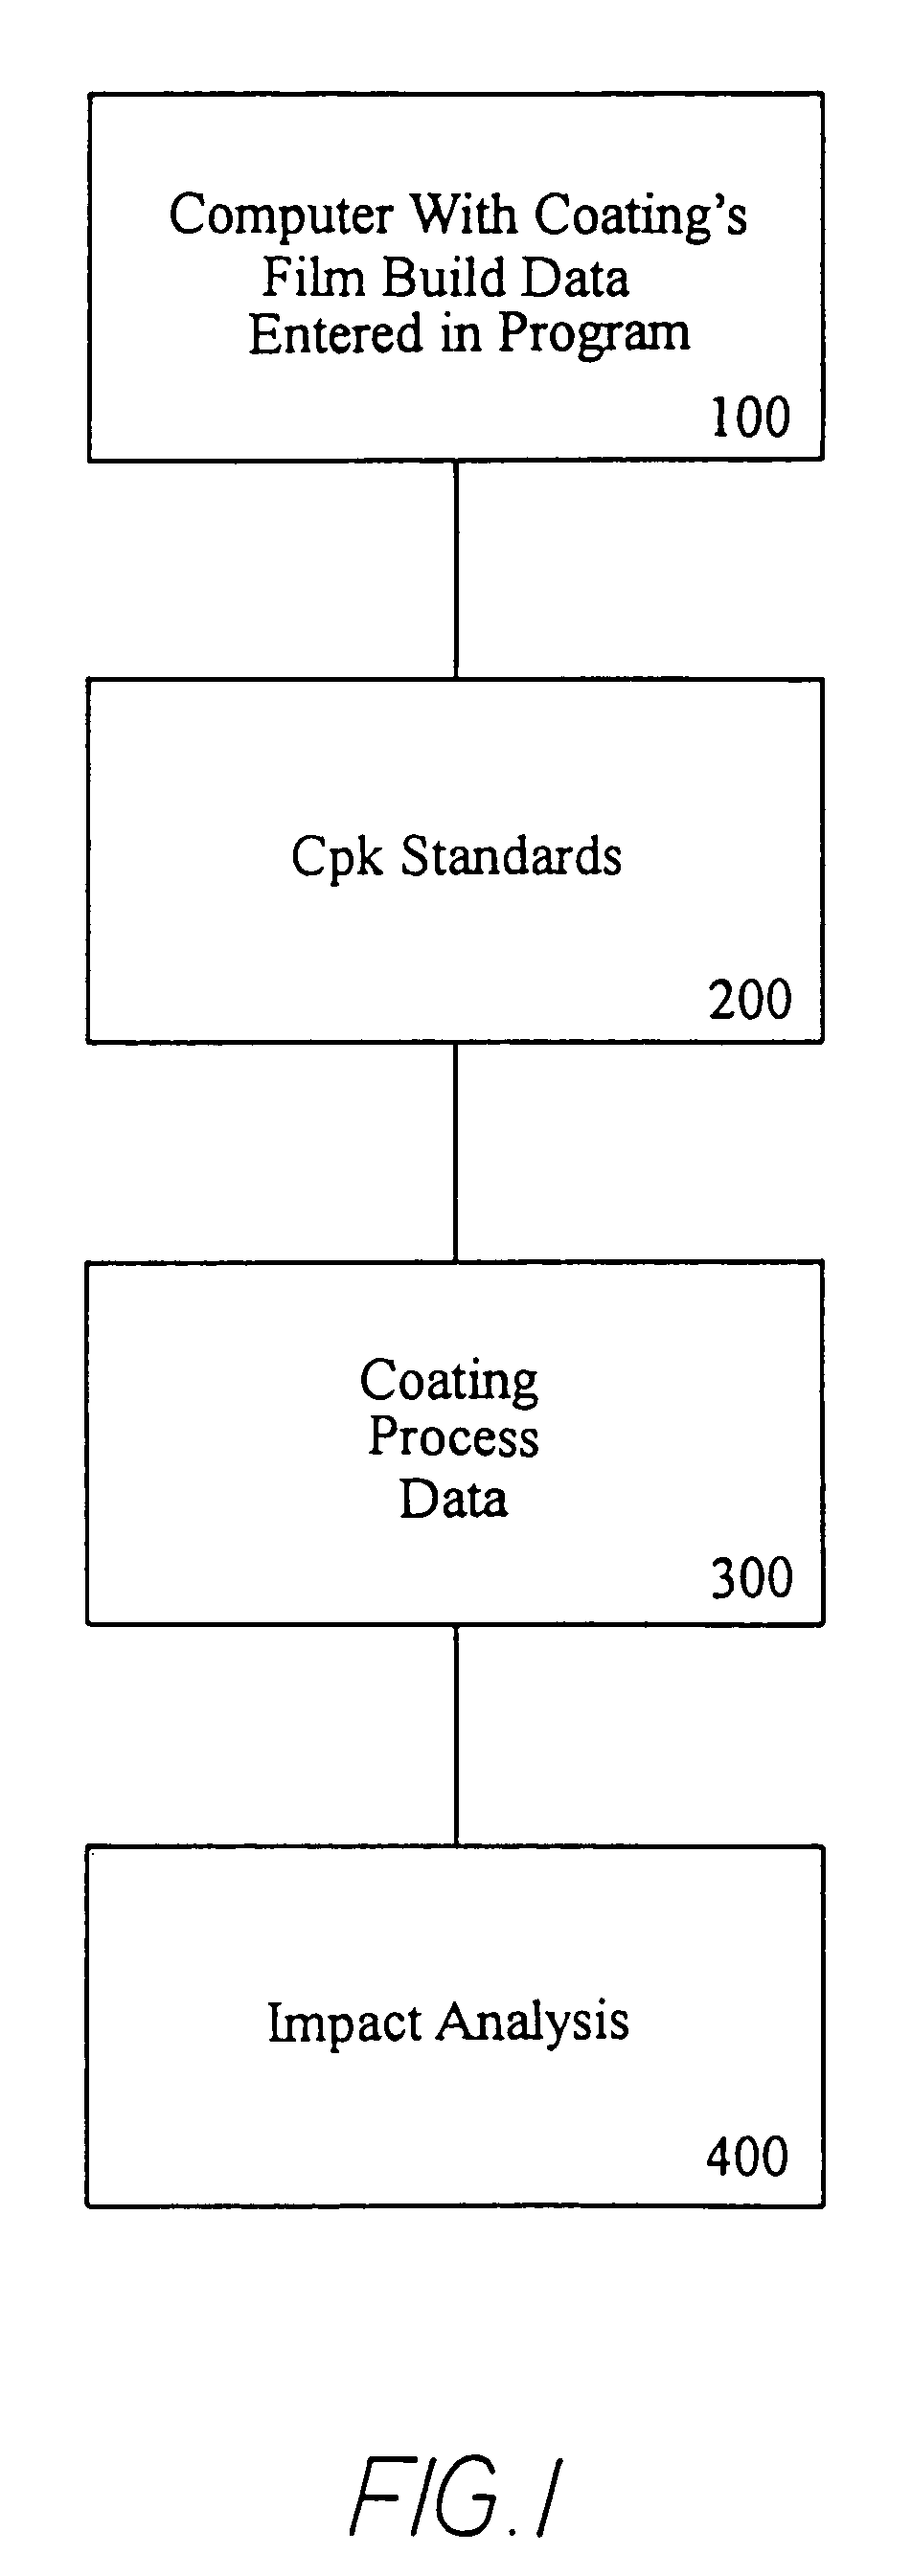 Method for generating coating film build usage and cost impact from Cpk's